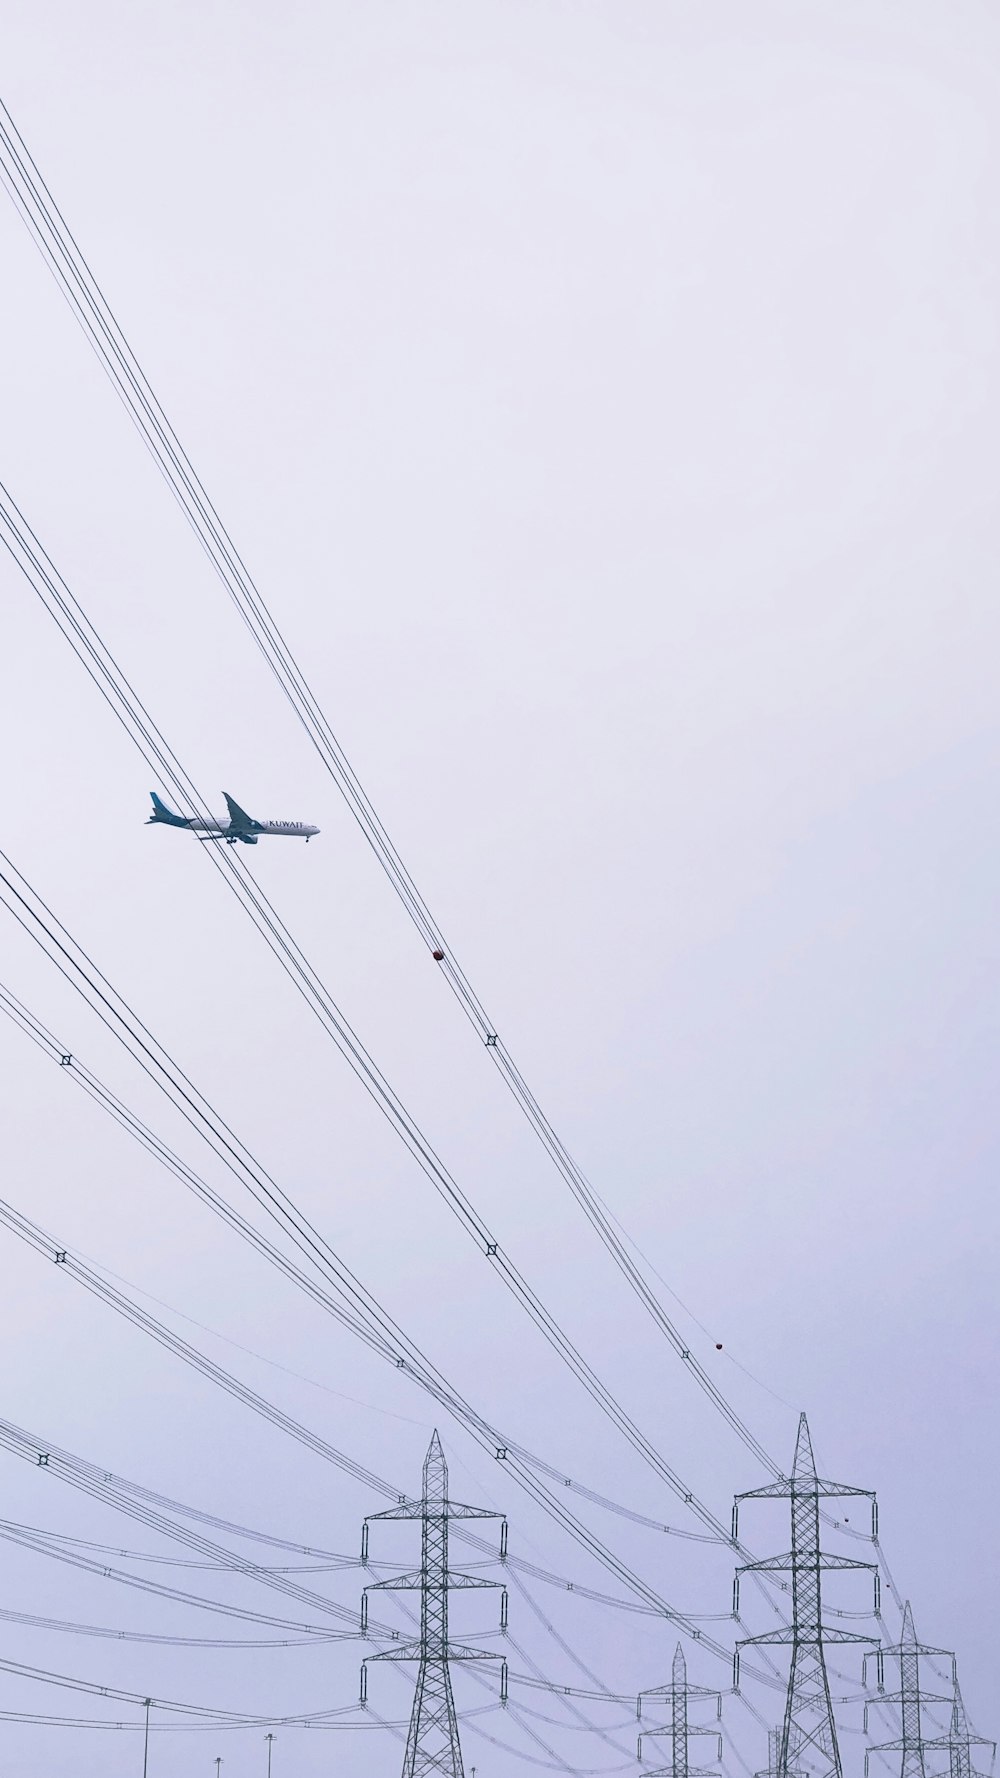 airplane above the electricity transmission post